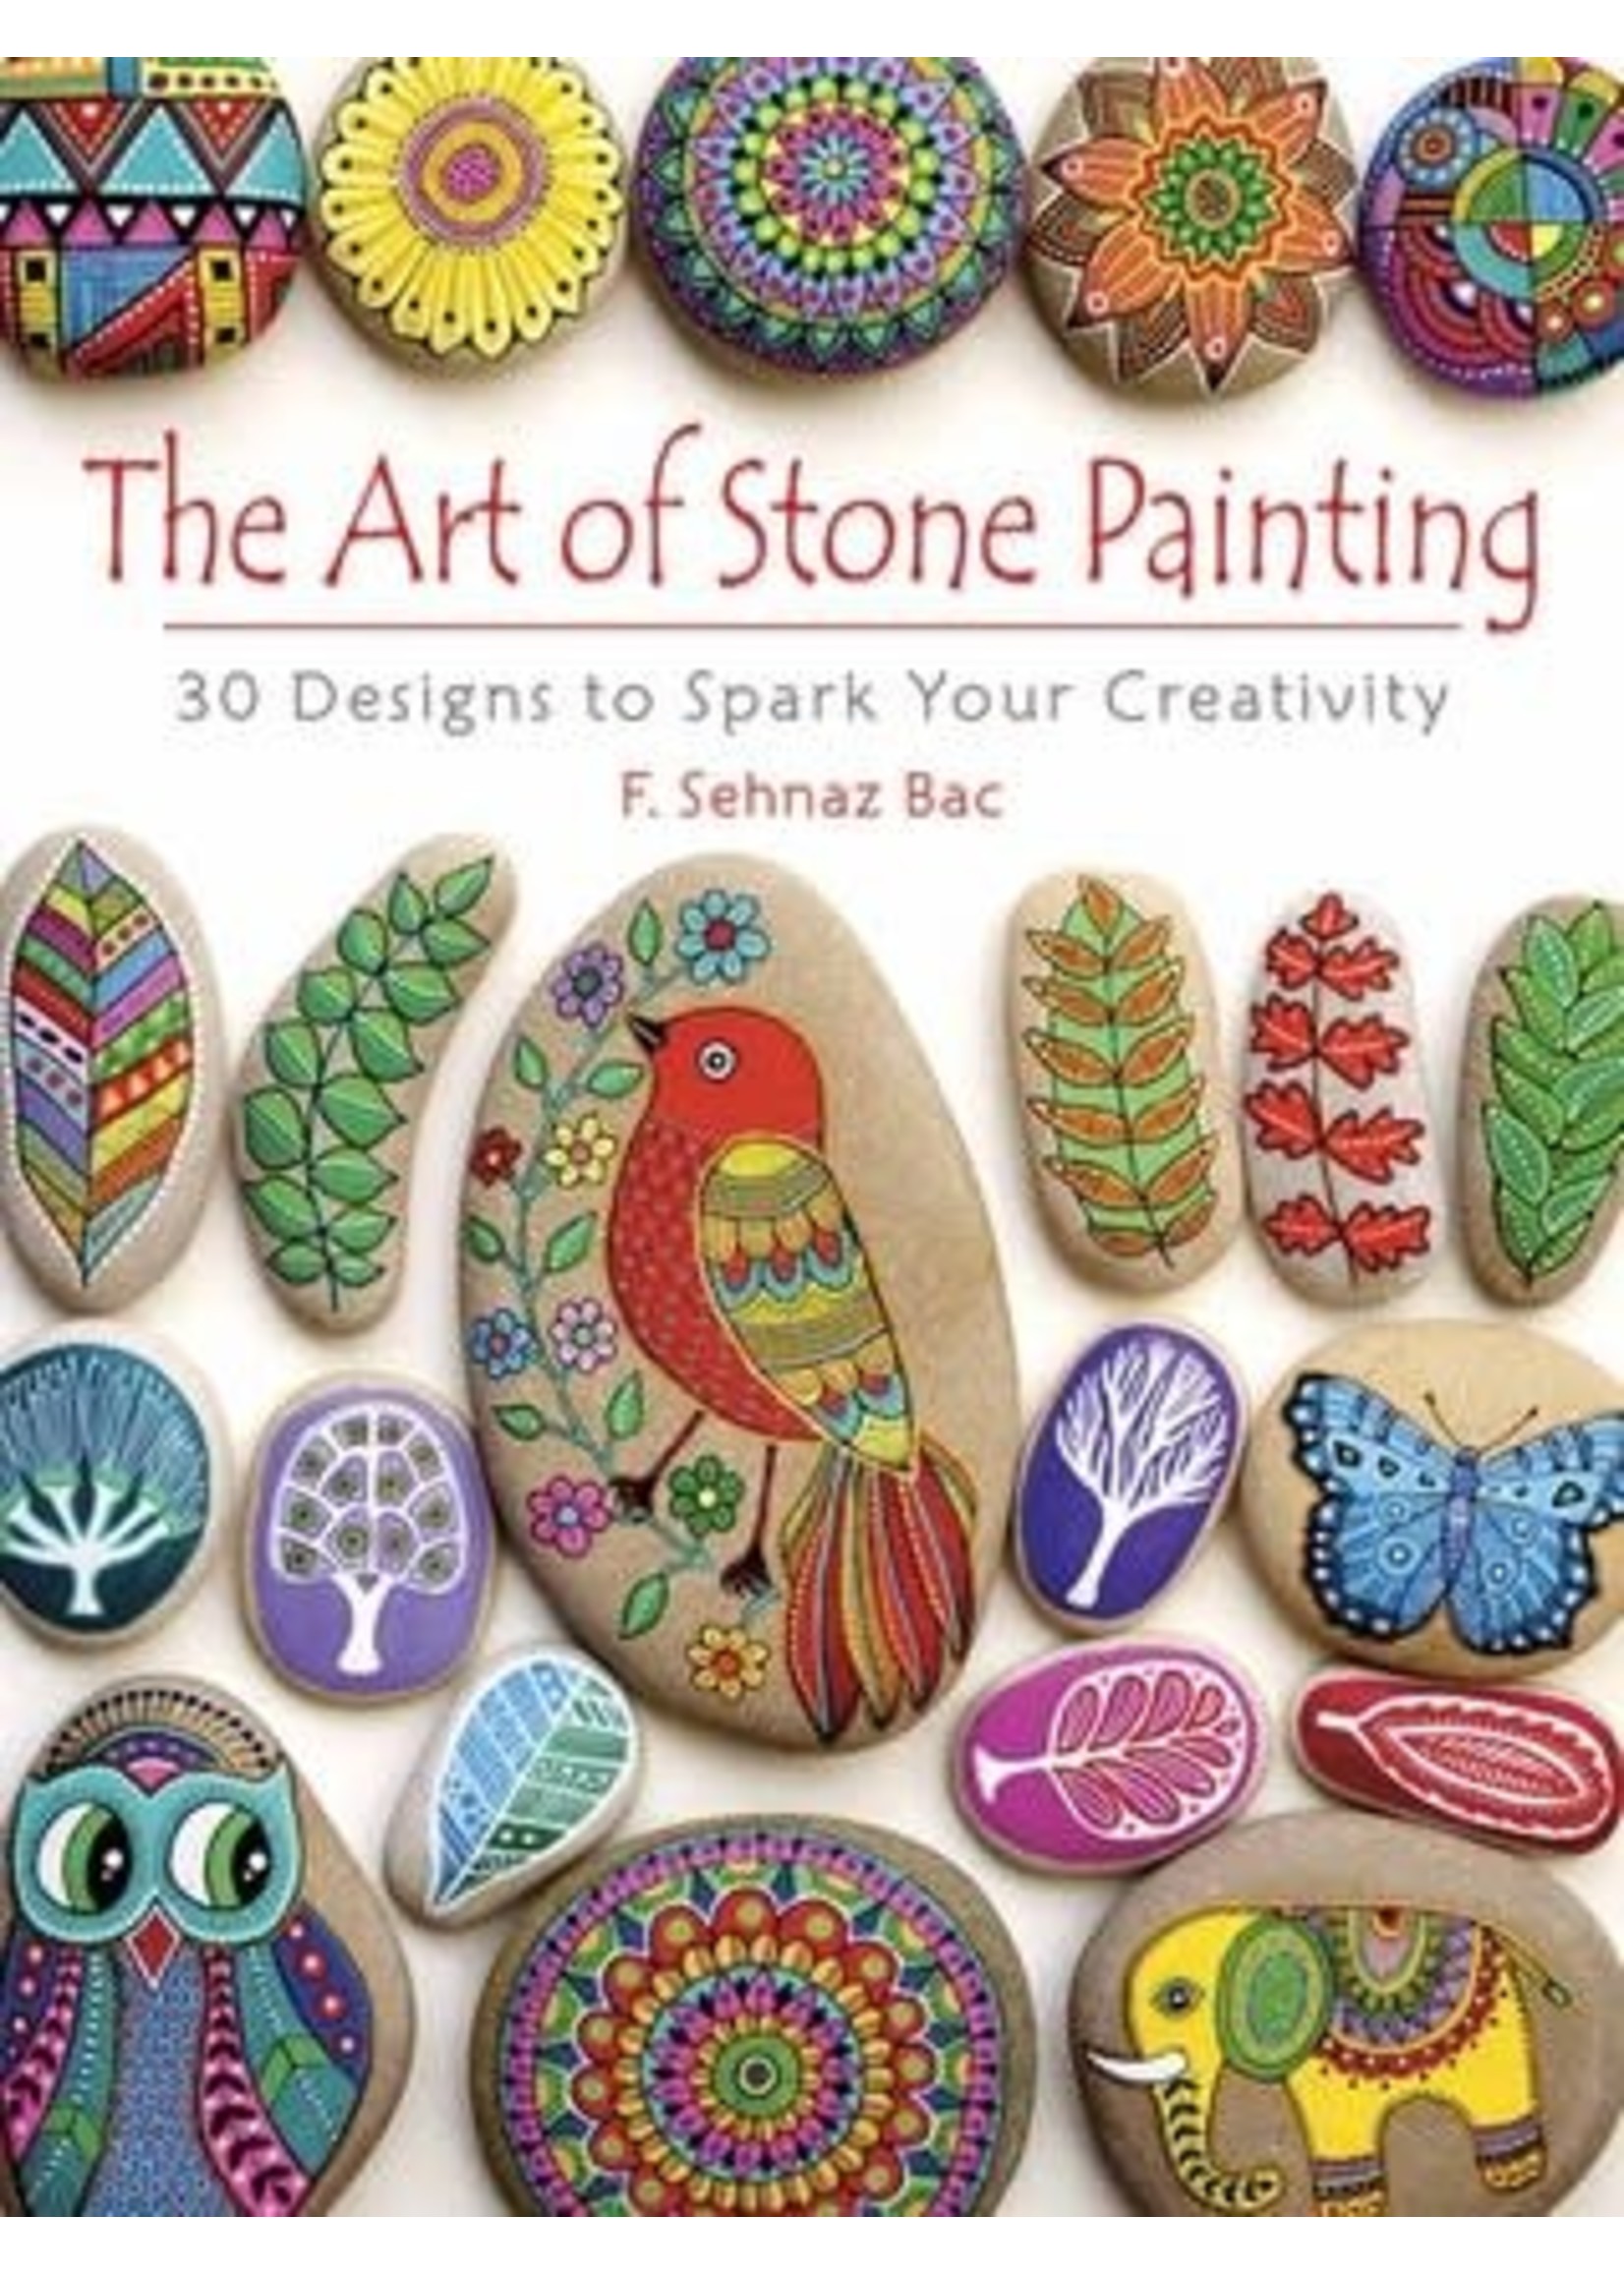 The Art of Stone Painting: 30 Designs to Spark Your Creativity by F. Sehnaz Bac